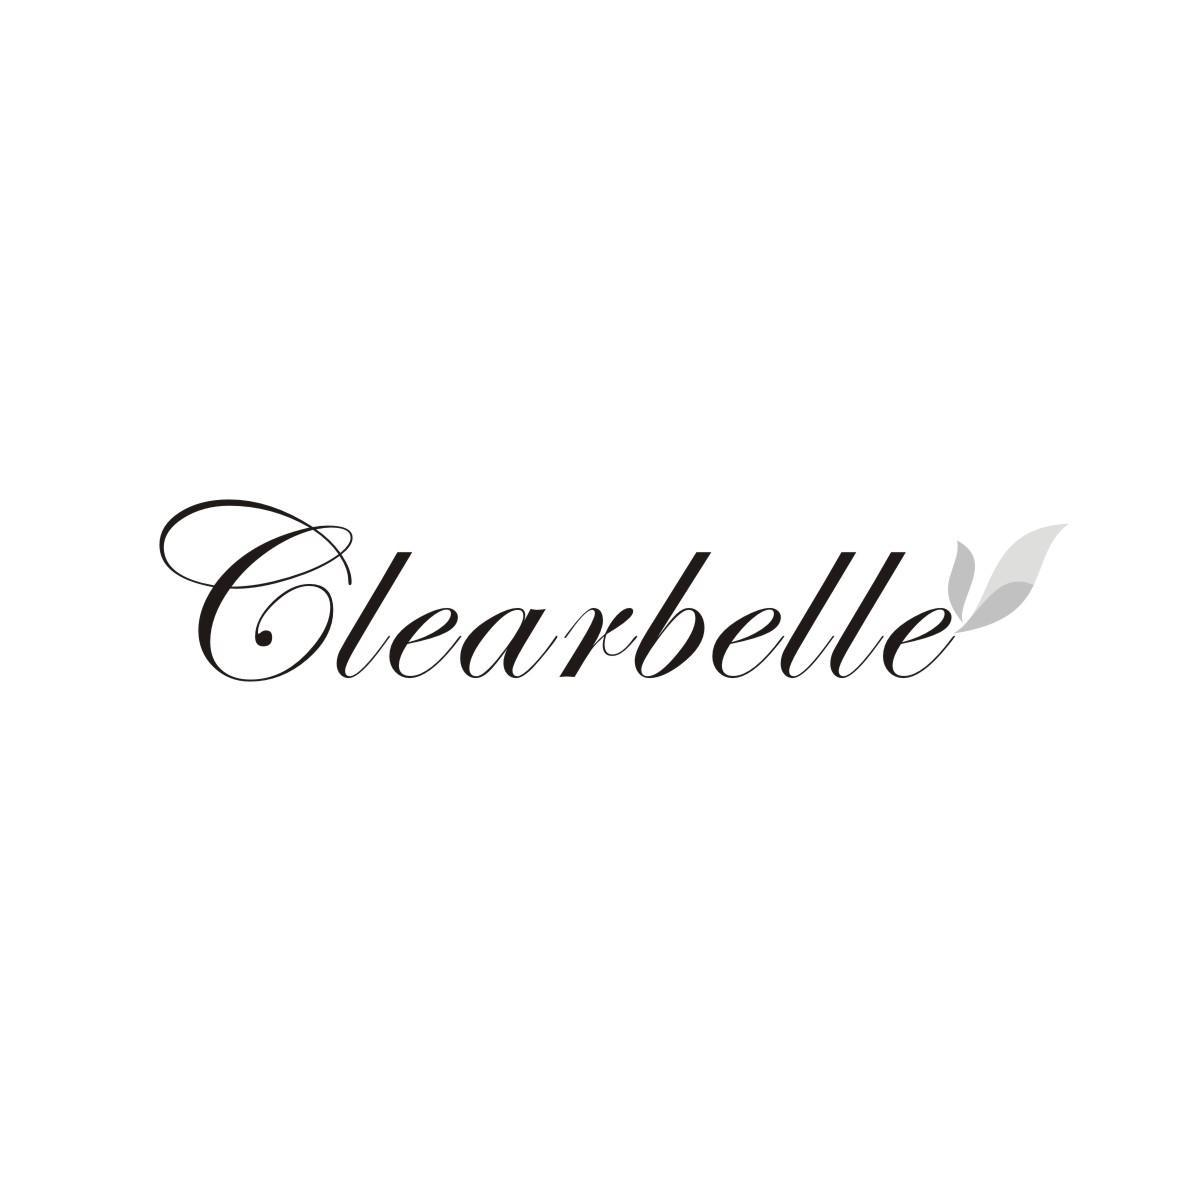 CLEARBELLE商标转让